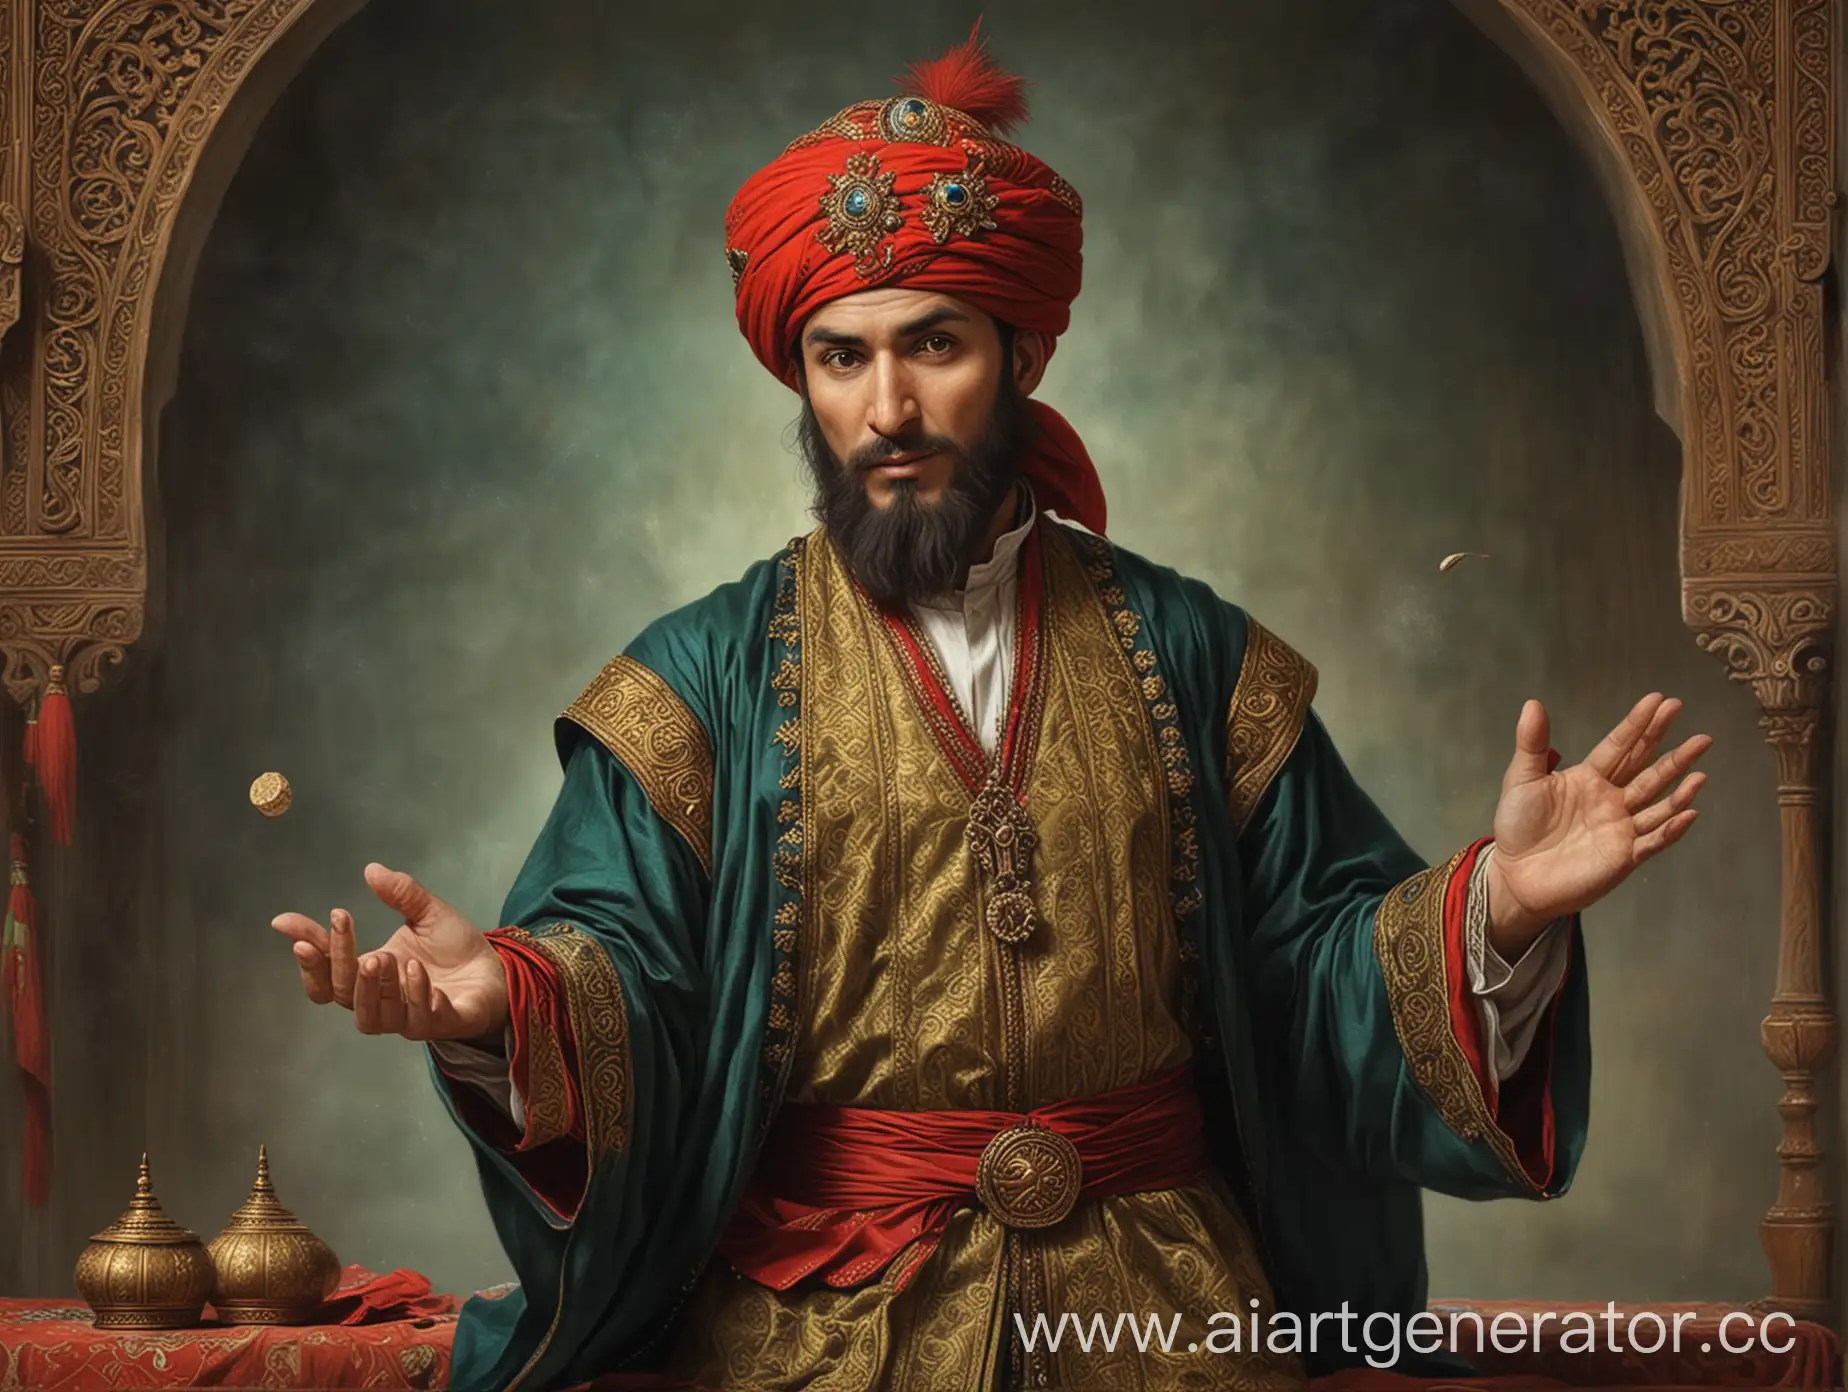 Timur-the-Magician-Performing-Illusions-in-a-Mystical-Forest